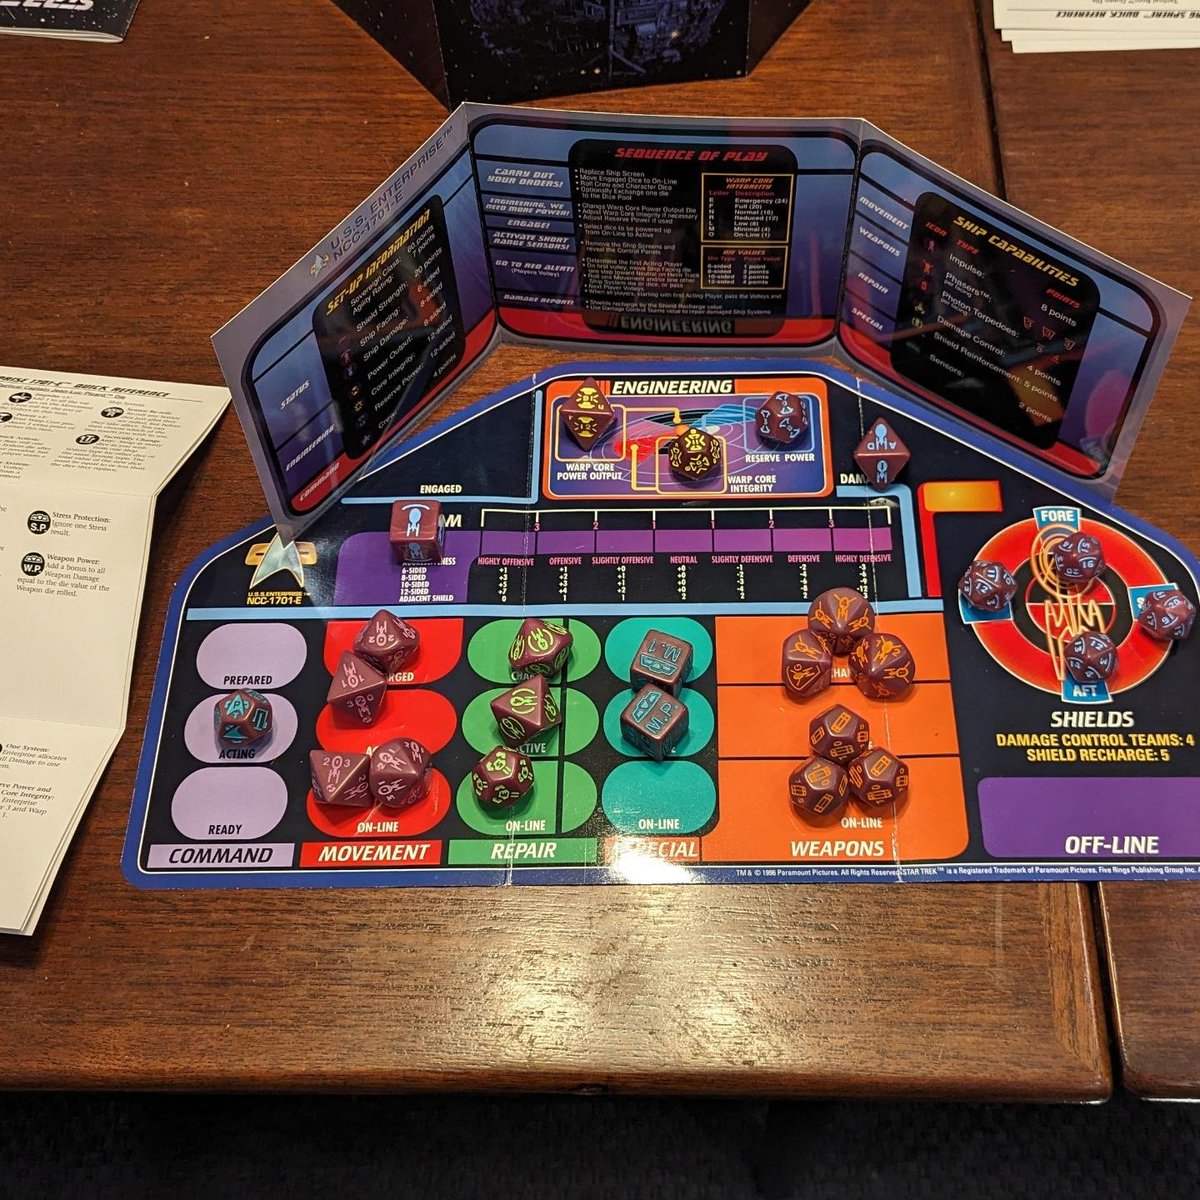 Celebrating First Contact the nerdiest way I know how... by digging the First Contact Collectible Dice Game out of storage and trying to decipher the icons! Picard vs Borg Queen! Sensors vs Assimilation! (I haven't played this since 1999, but the set is too cool to give up.)